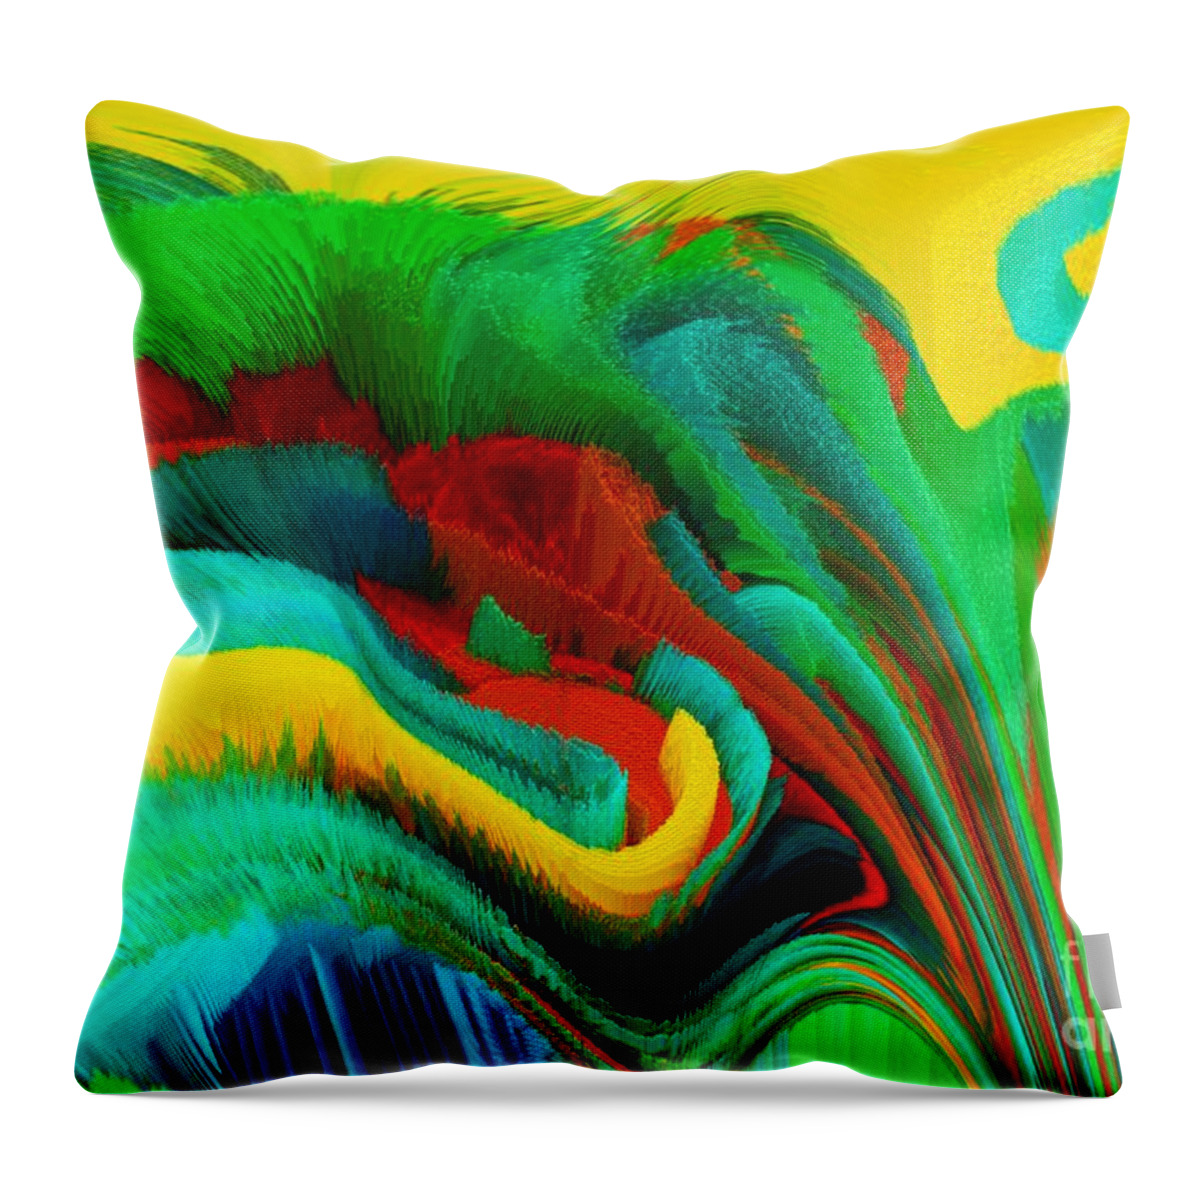 Bright Colors Throw Pillow featuring the mixed media Flowers Of My Dreams 32 by Elena Gantchikova